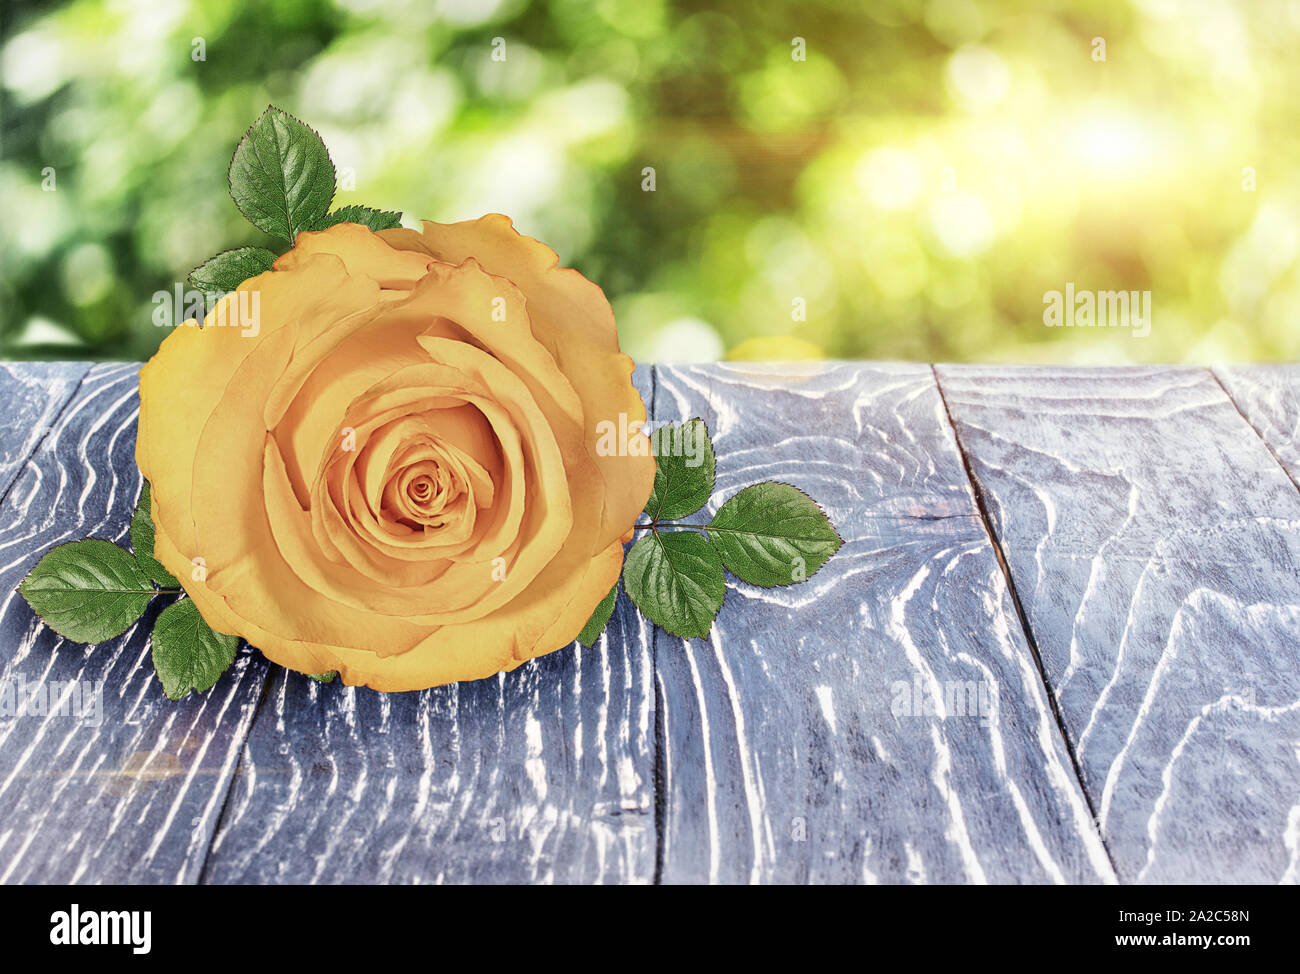 Rose on wooden deck table over beautiful bokeh background Stock Photo